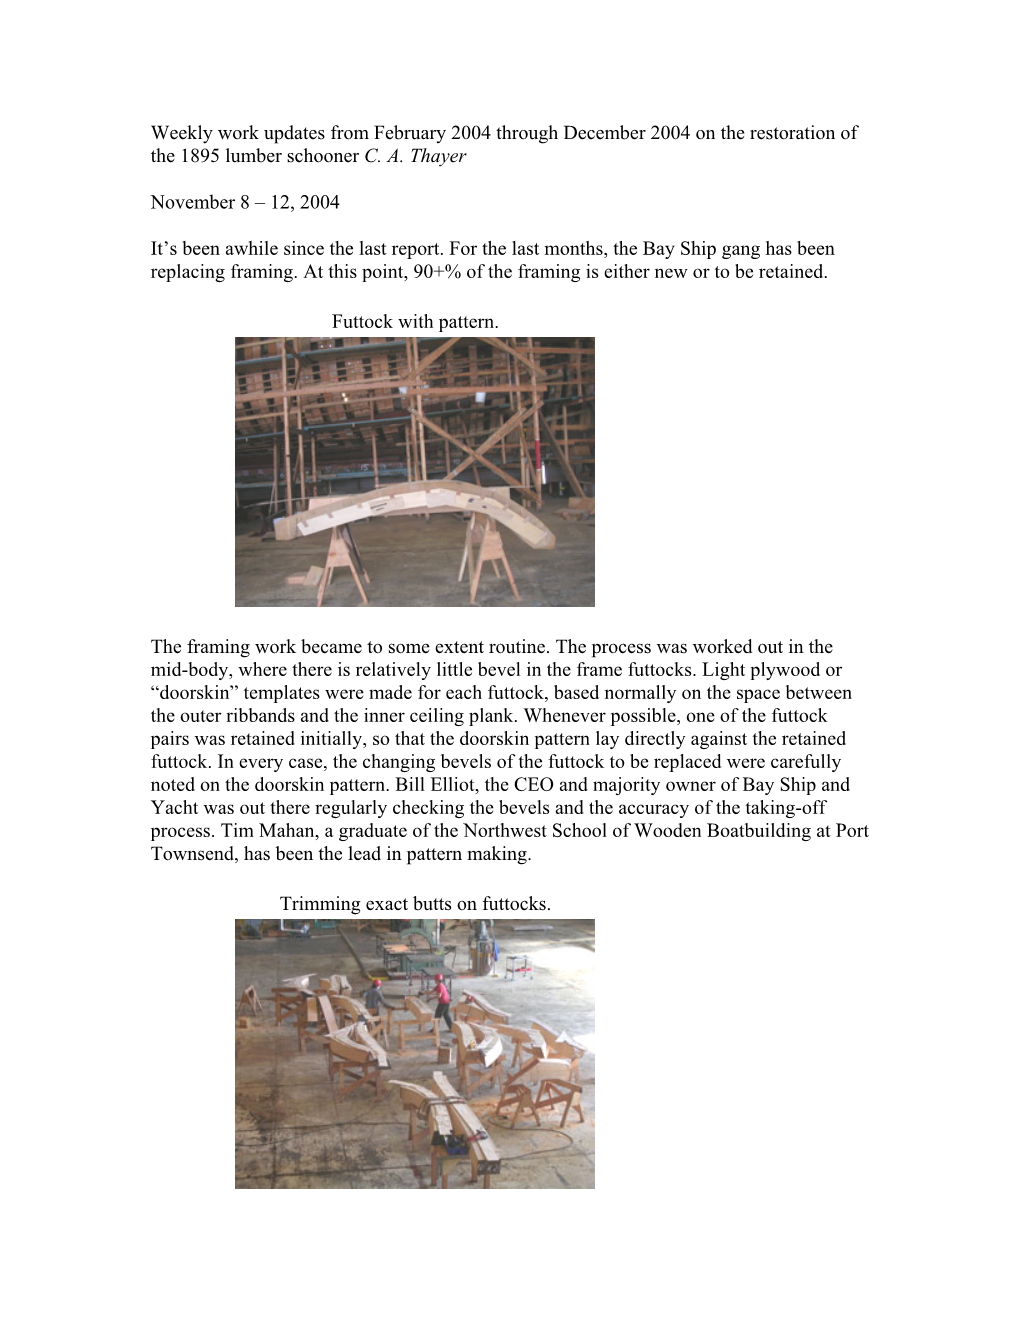 Weekly Work Updates from February 2004 Through December 2004 on the Restoration of the 1895 Lumber Schooner C